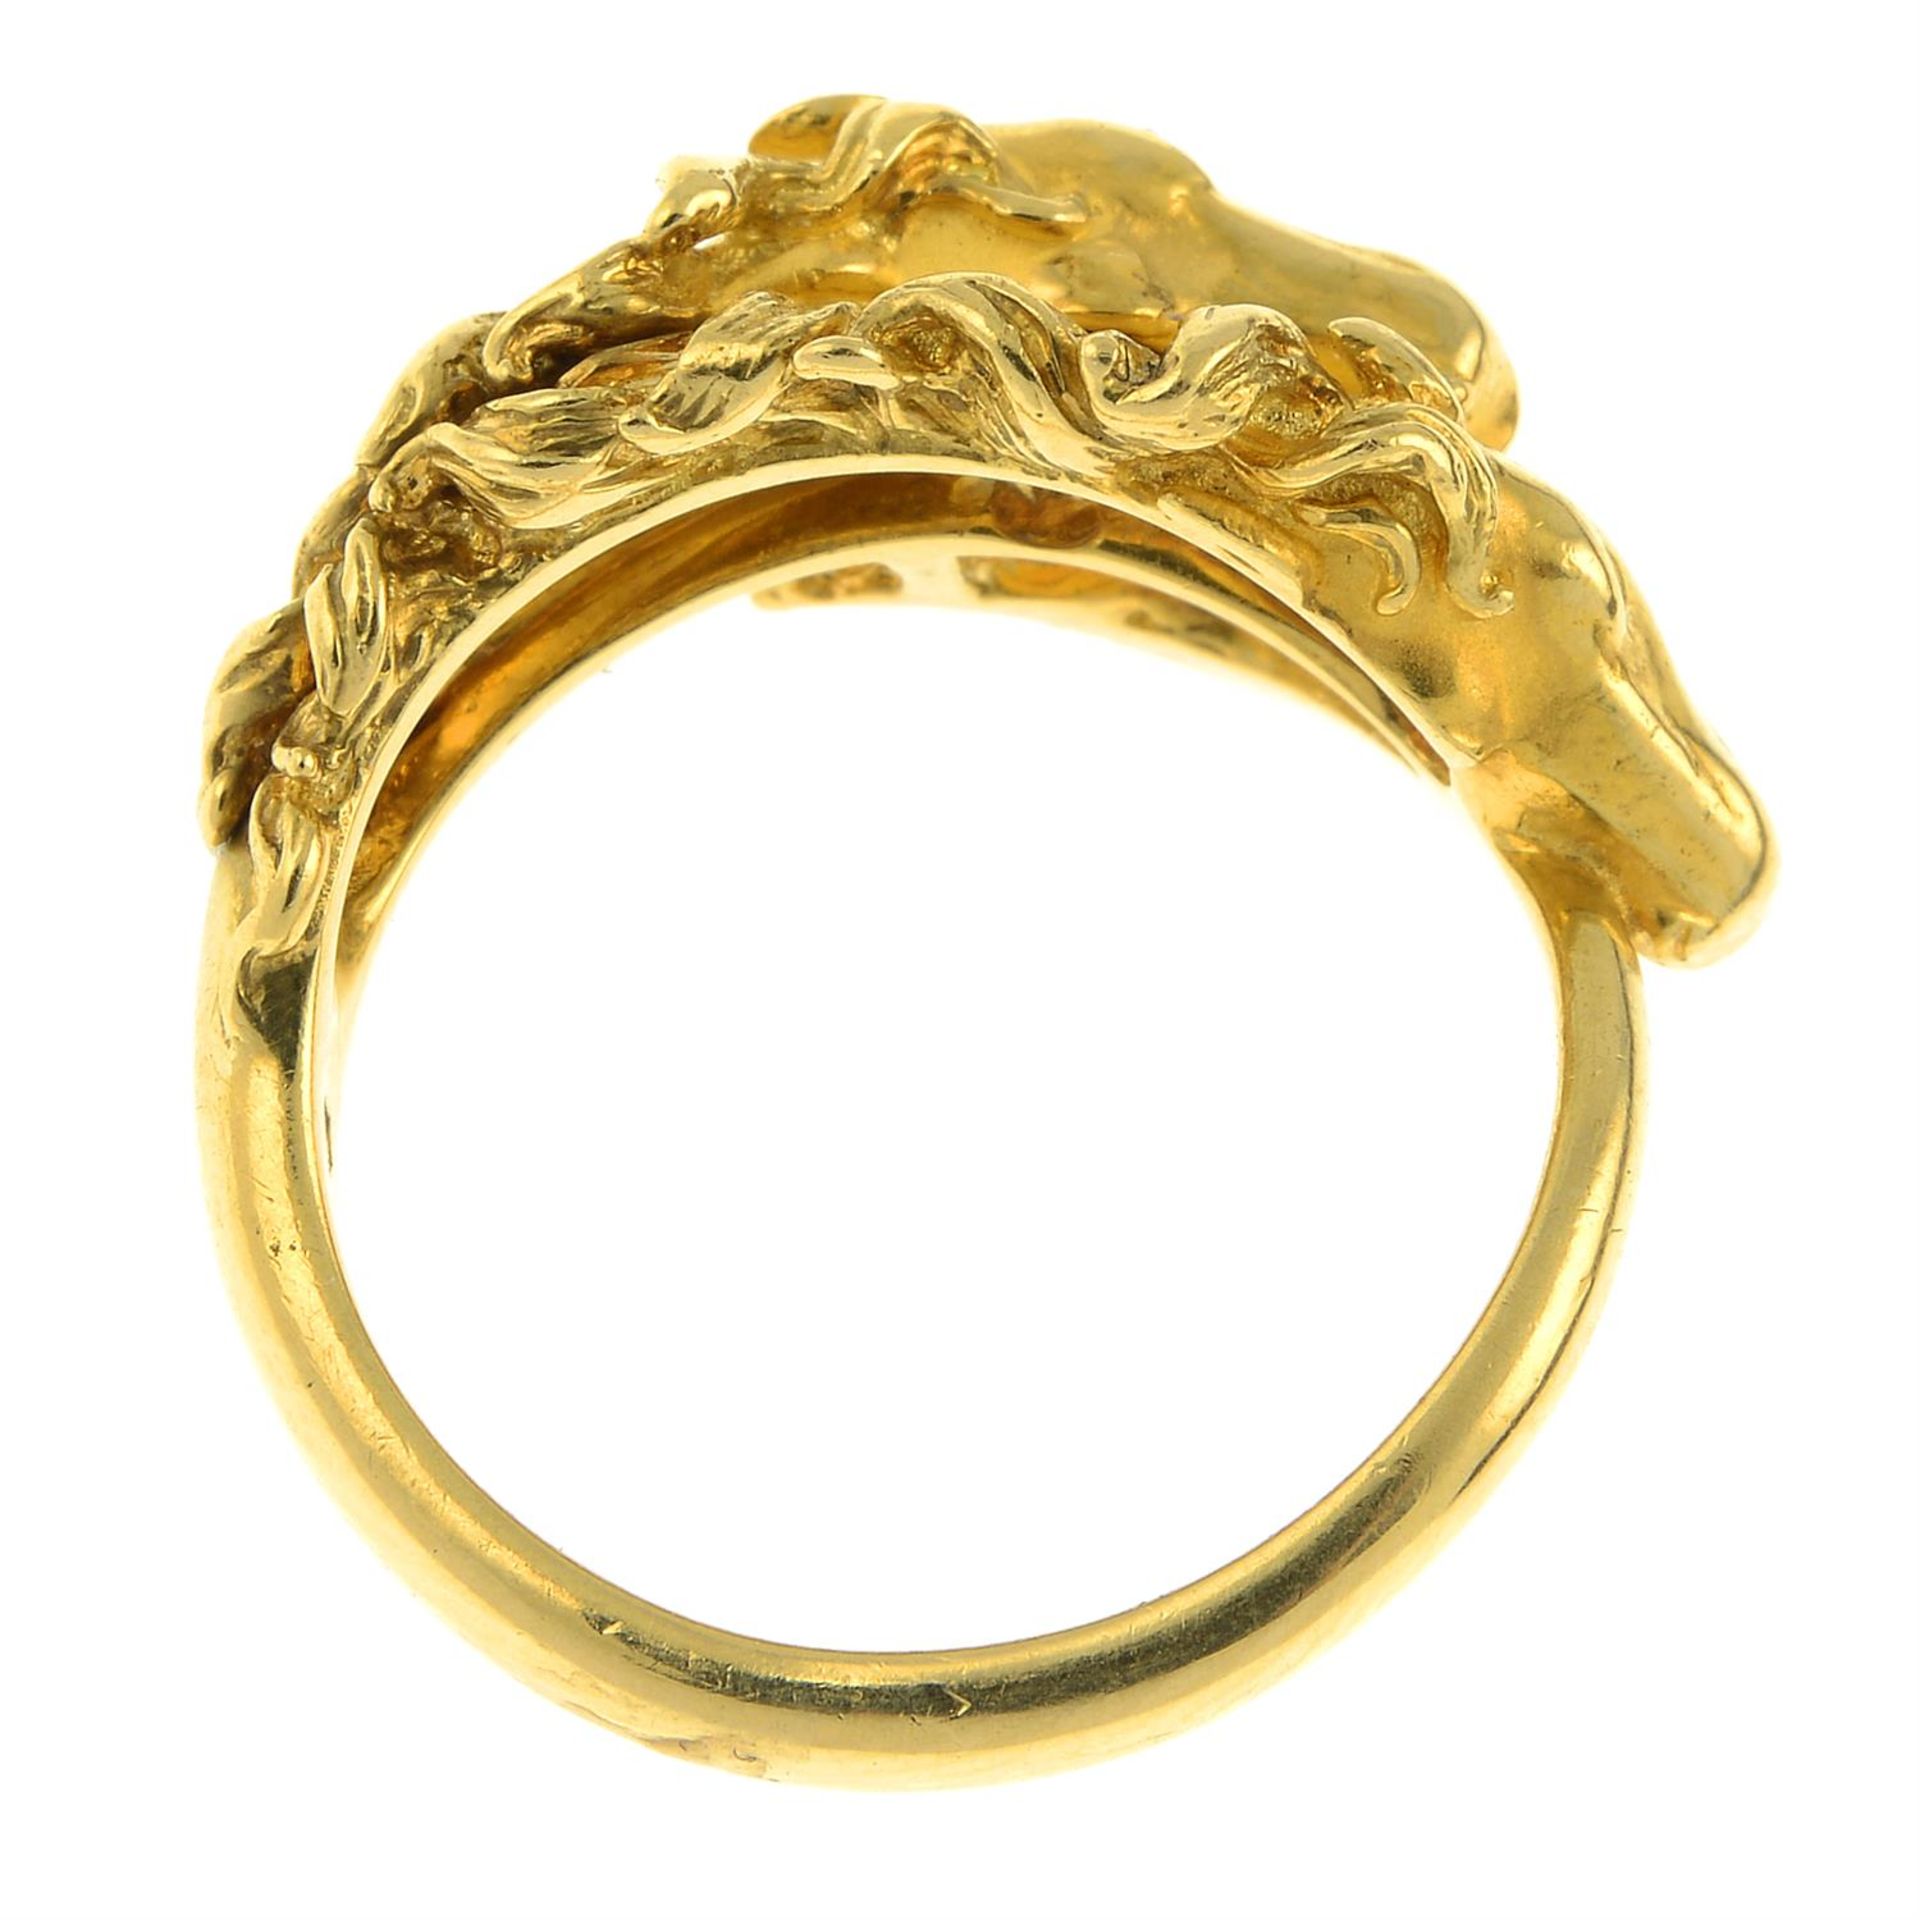 An 18ct gold horse ring, with diamond eyes, by Carrera y Carrera. - Image 5 of 6